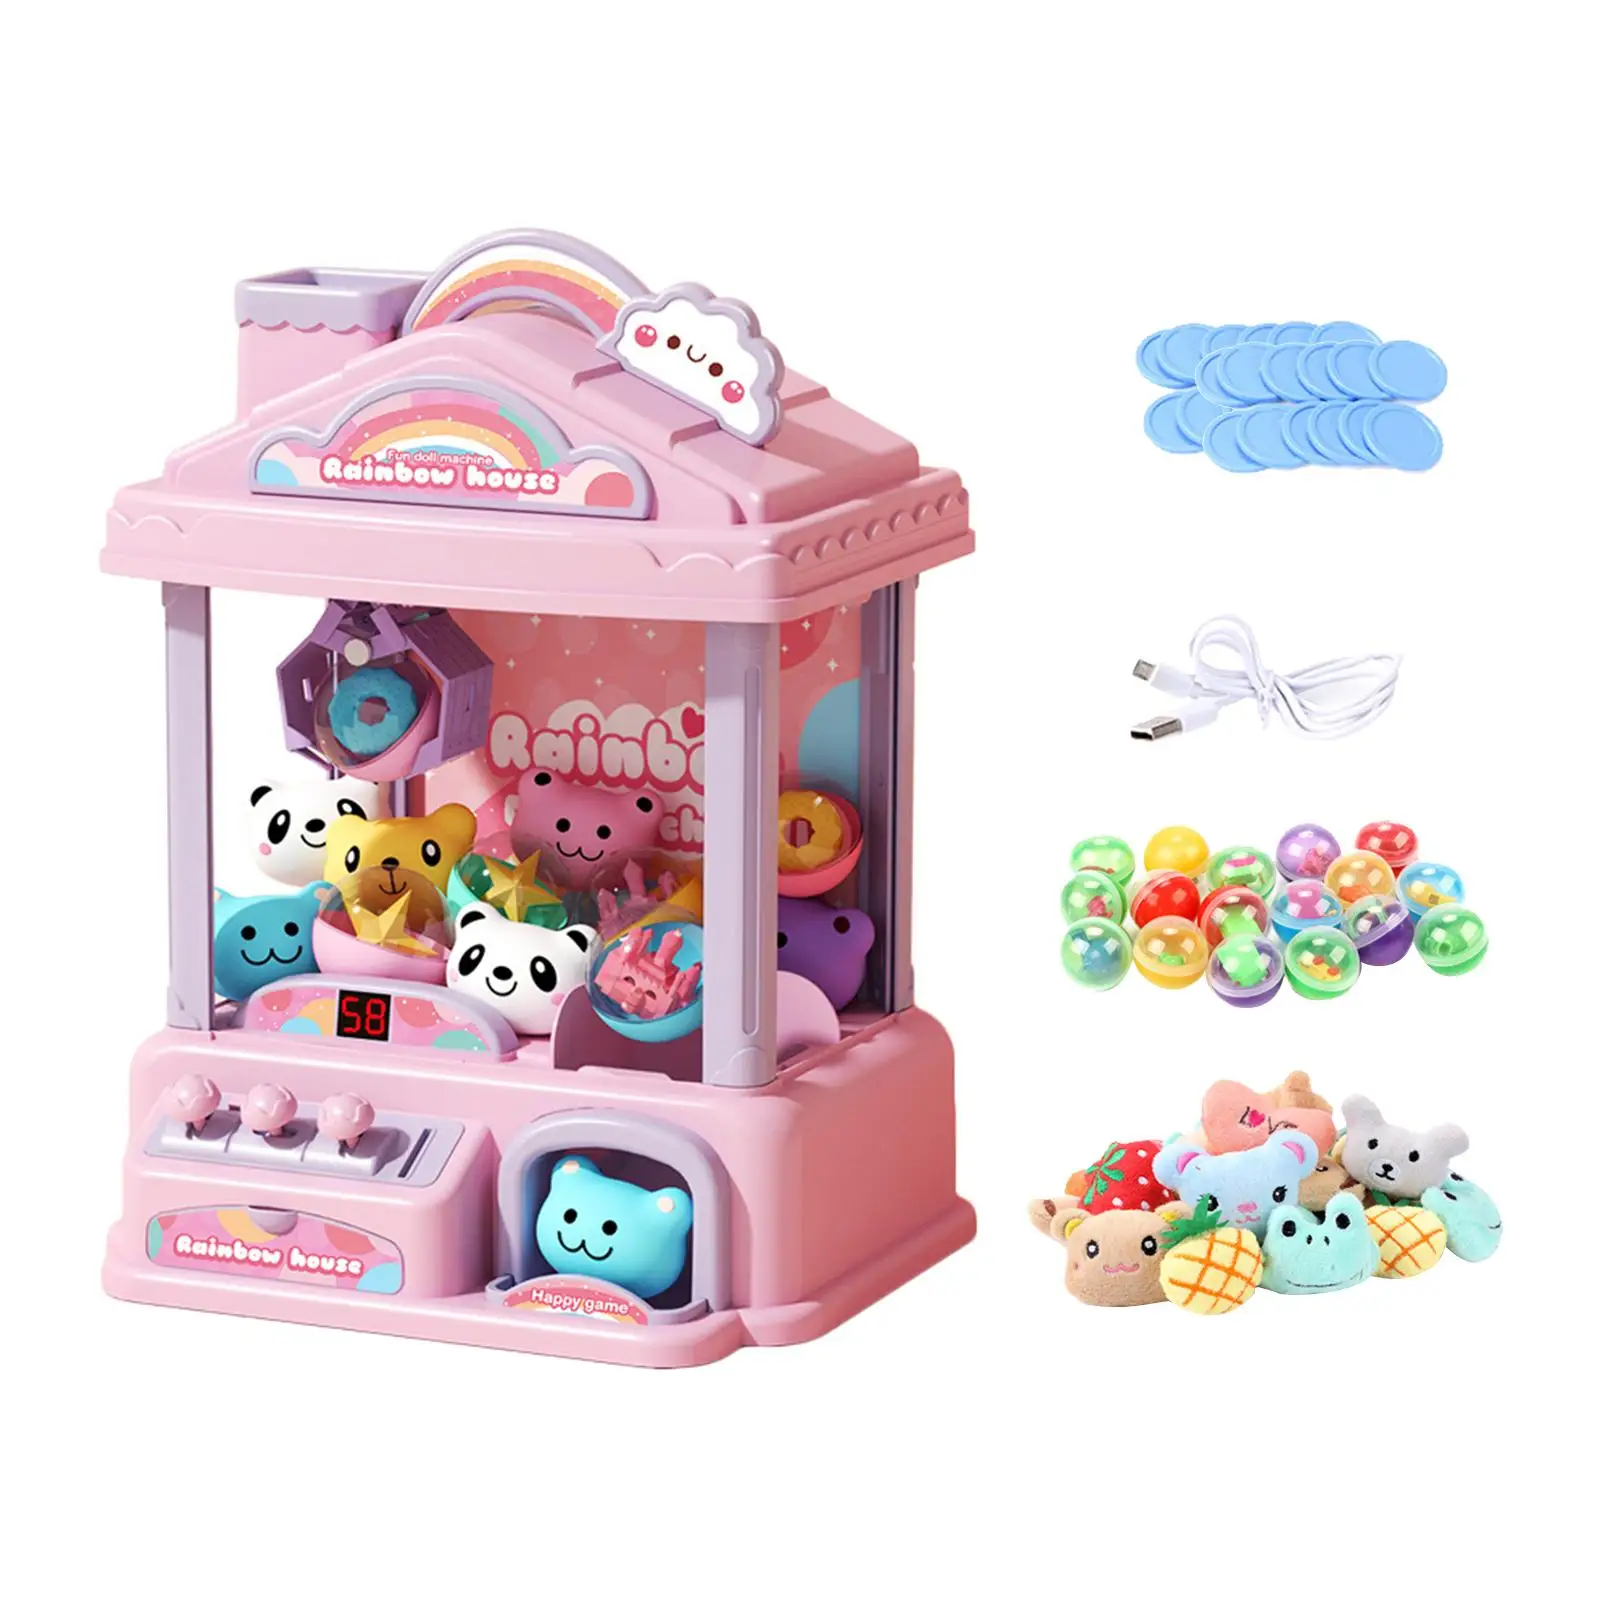 Claw Machine Arcade Game Arcade Candy Capsule Claw Game Prizes Toy for Children 3-6 Years Old Toddler Adults Birthday Gifts